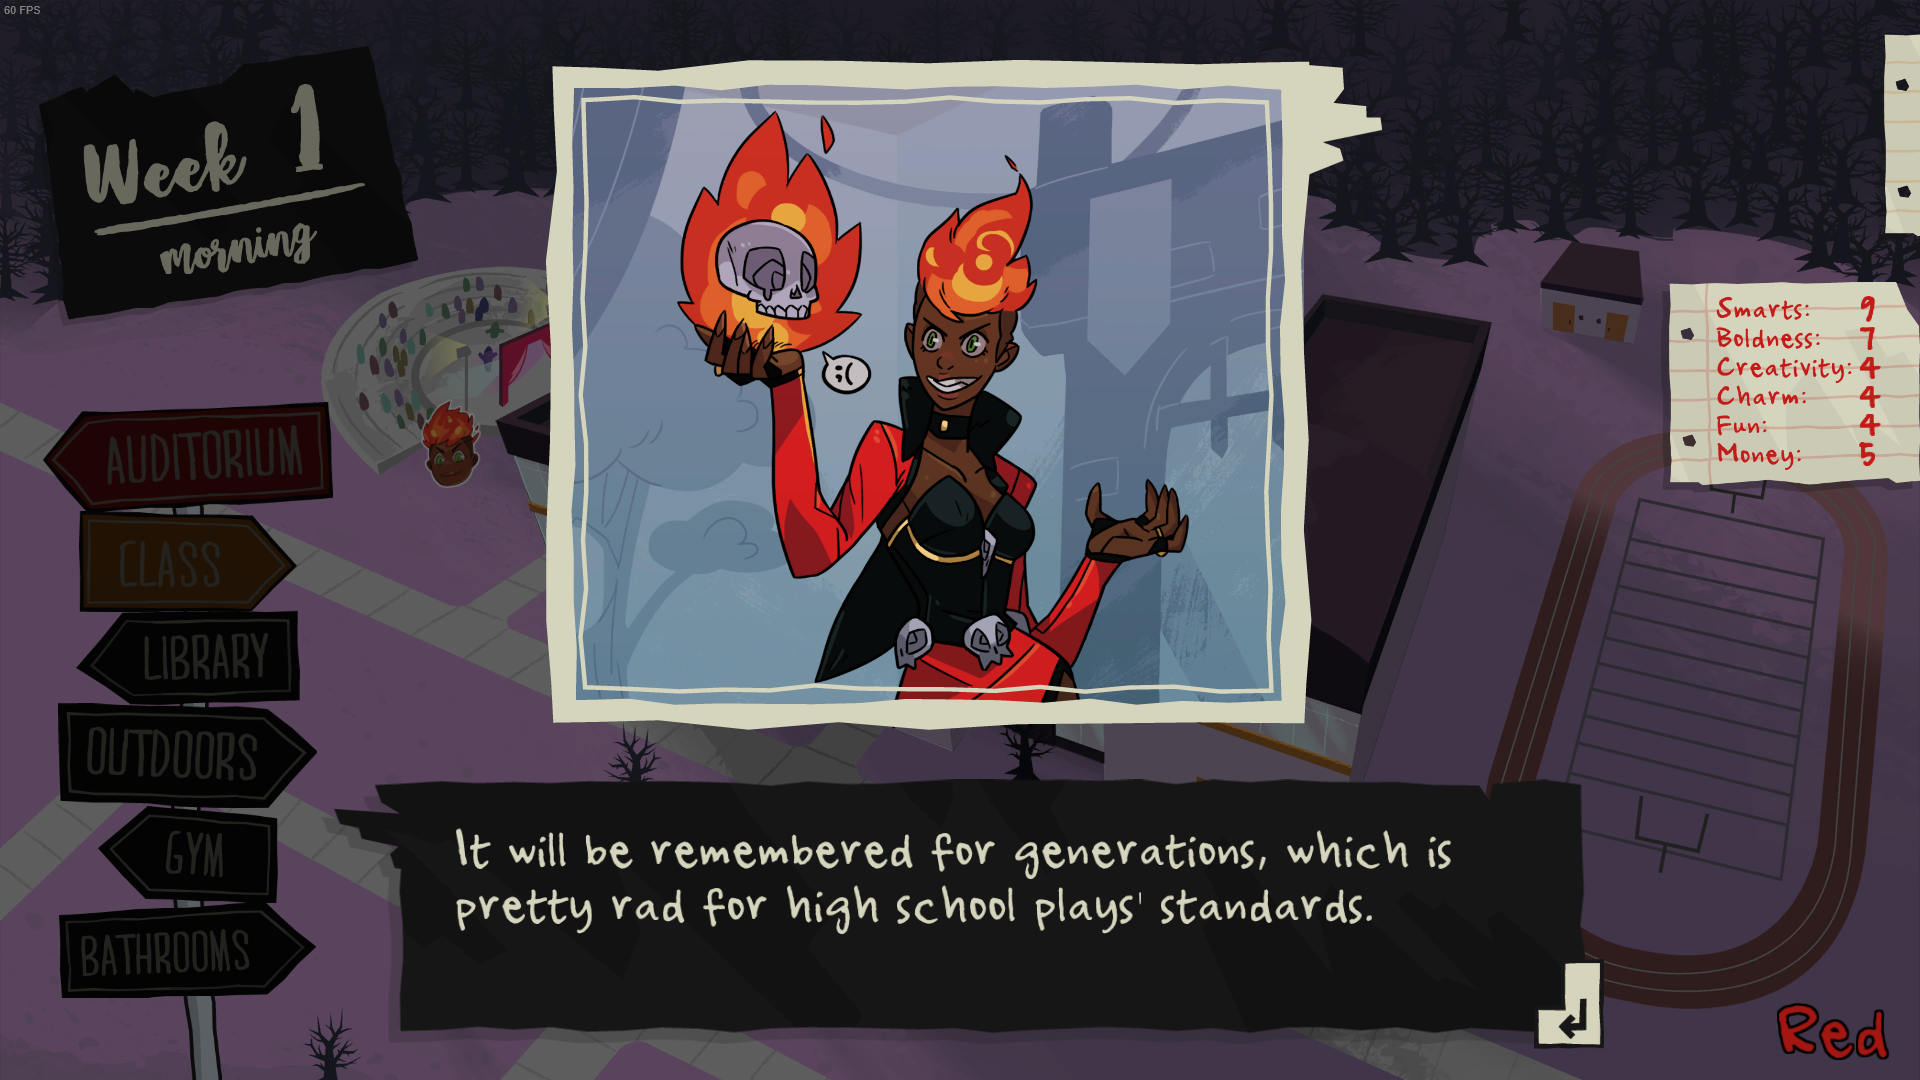 A scene from the game where a monster with flame in her hands talks to the player about her opinions.